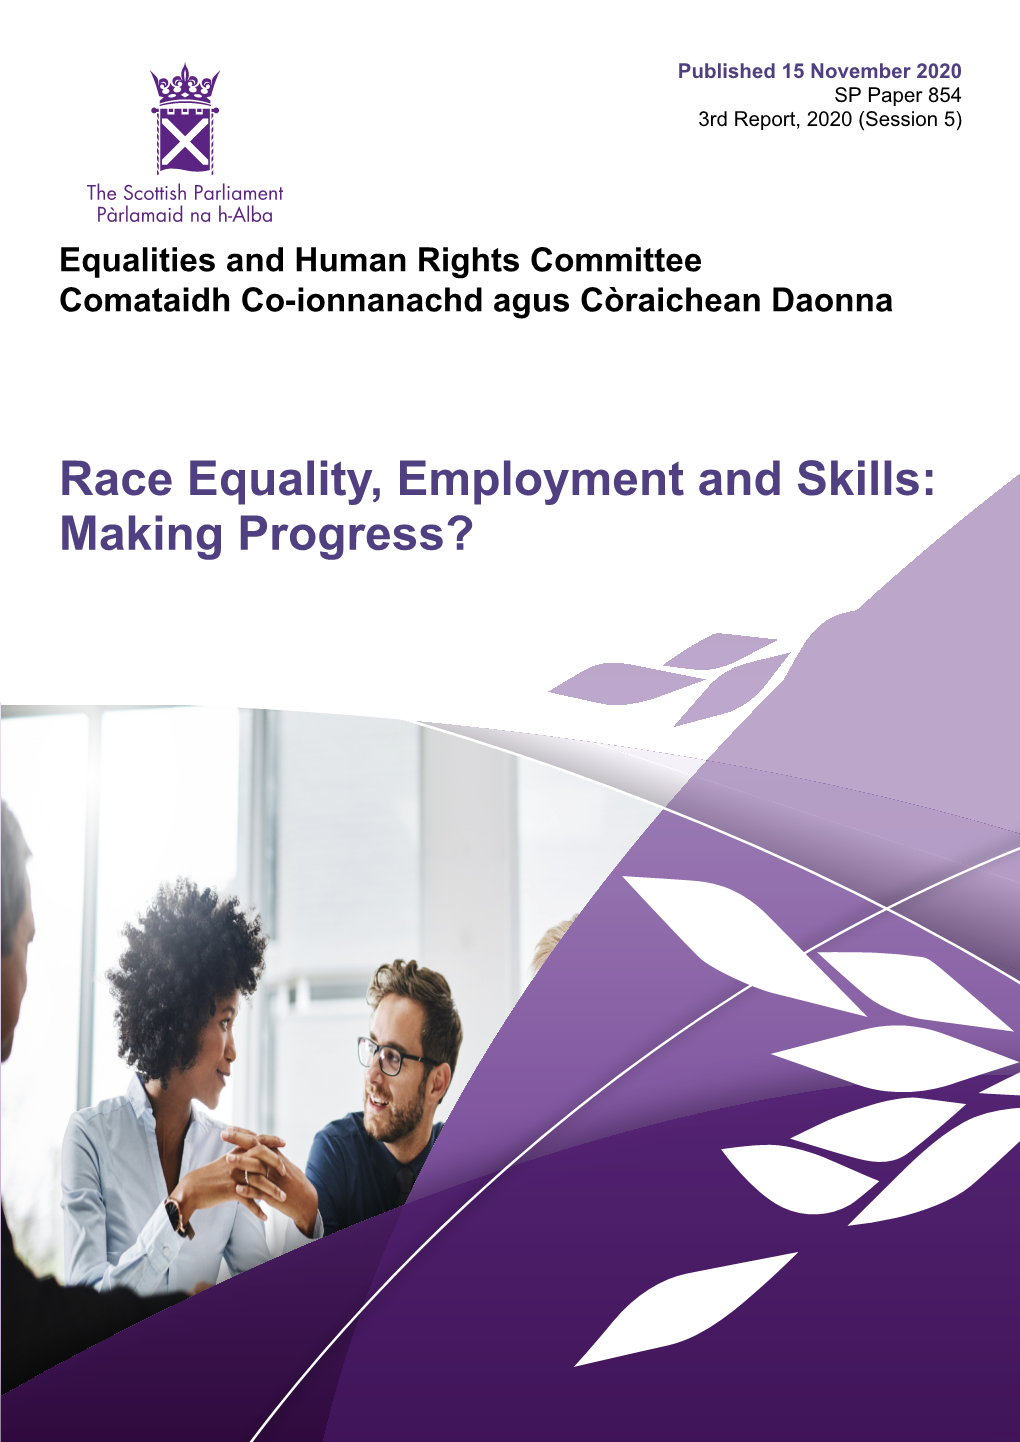 Race Equality, Employment and Skills: Making Progress? Published in Scotland by the Scottish Parliamentary Corporate Body